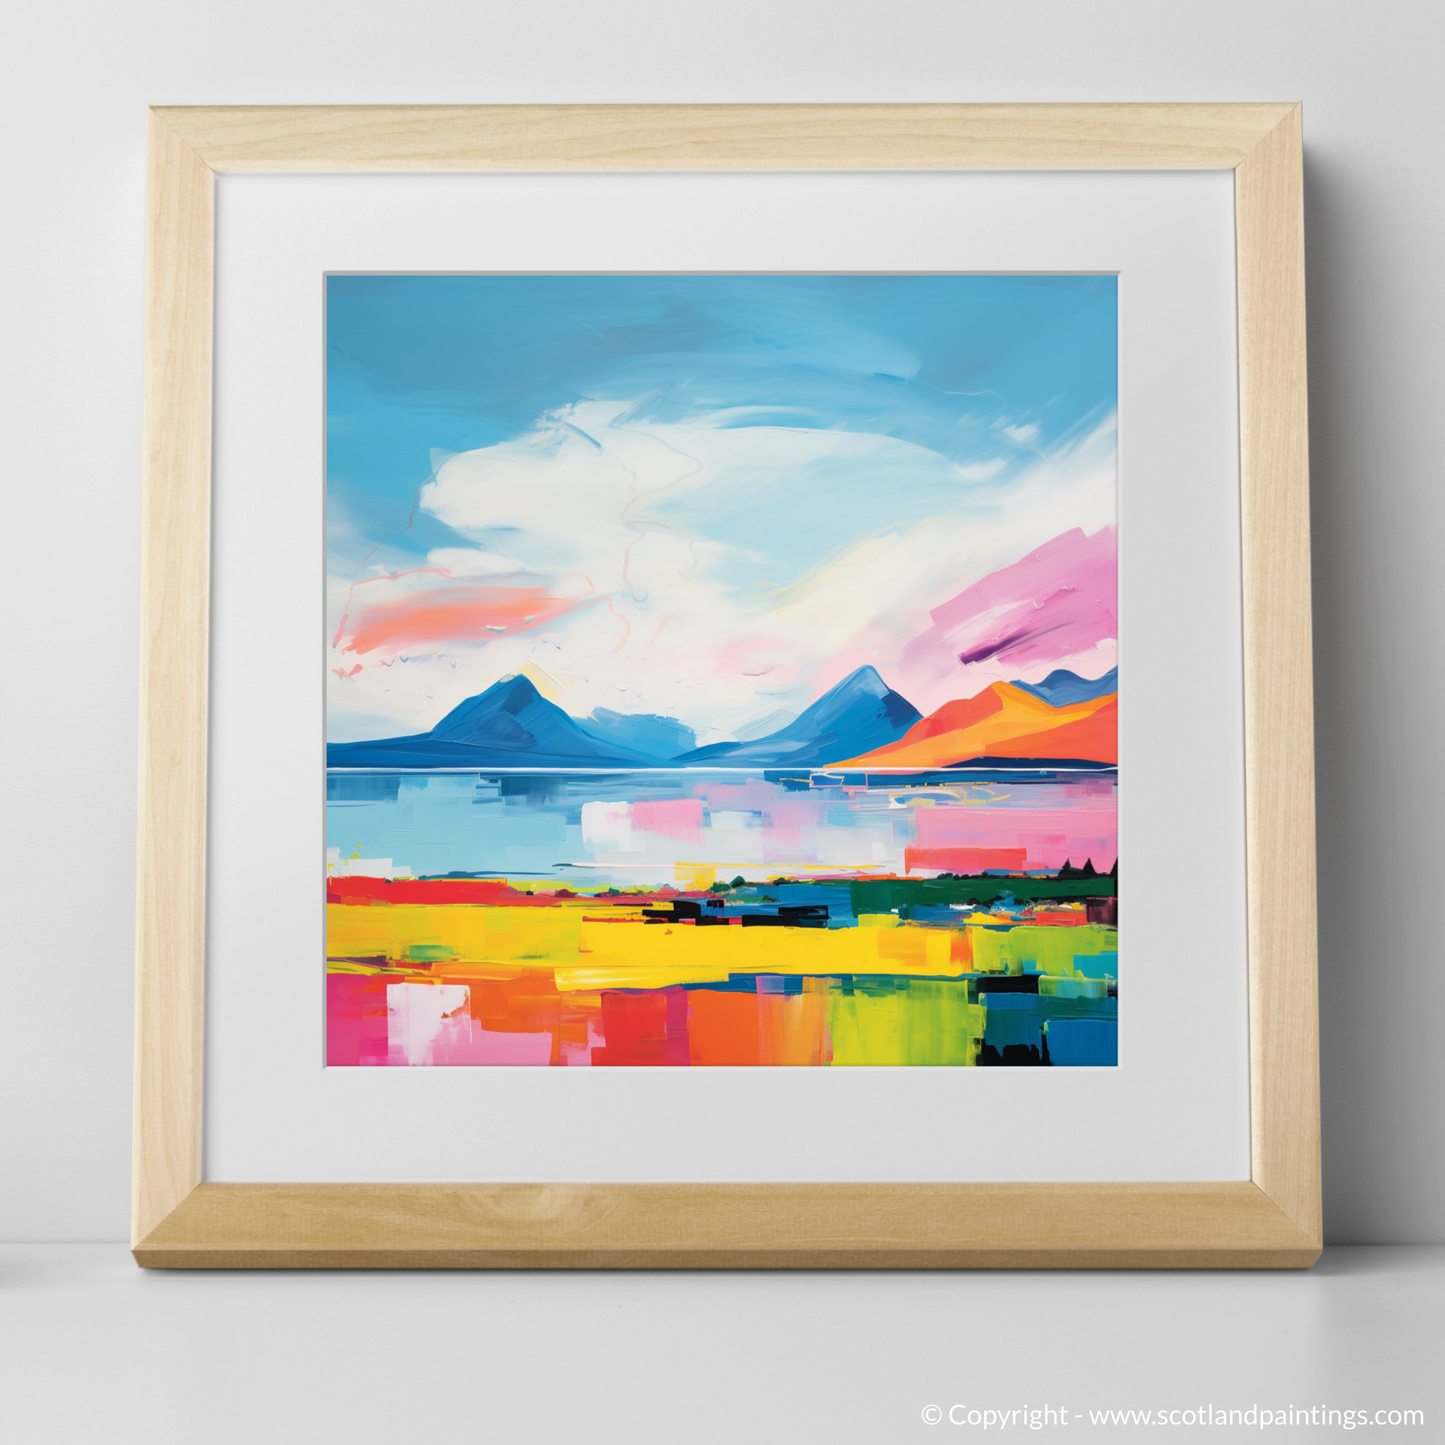 Art Print of Isle of Arran, Firth of Clyde in summer with a natural frame